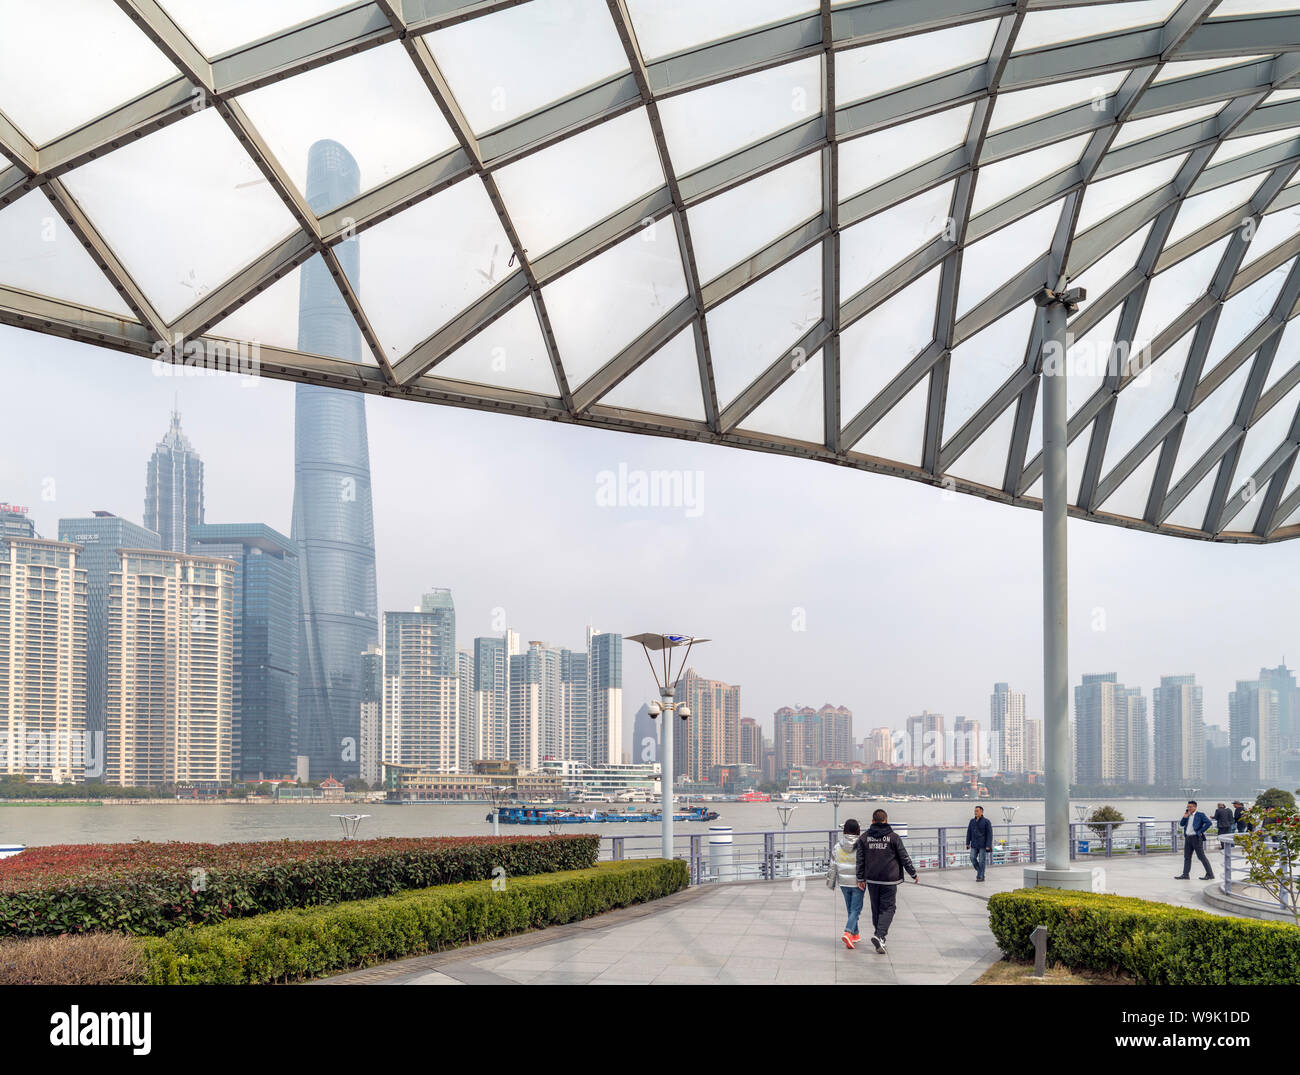 The business district of Pudong and the Huangpu River viewed from The Bund (Waitan), Shanghai, China Stock Photo